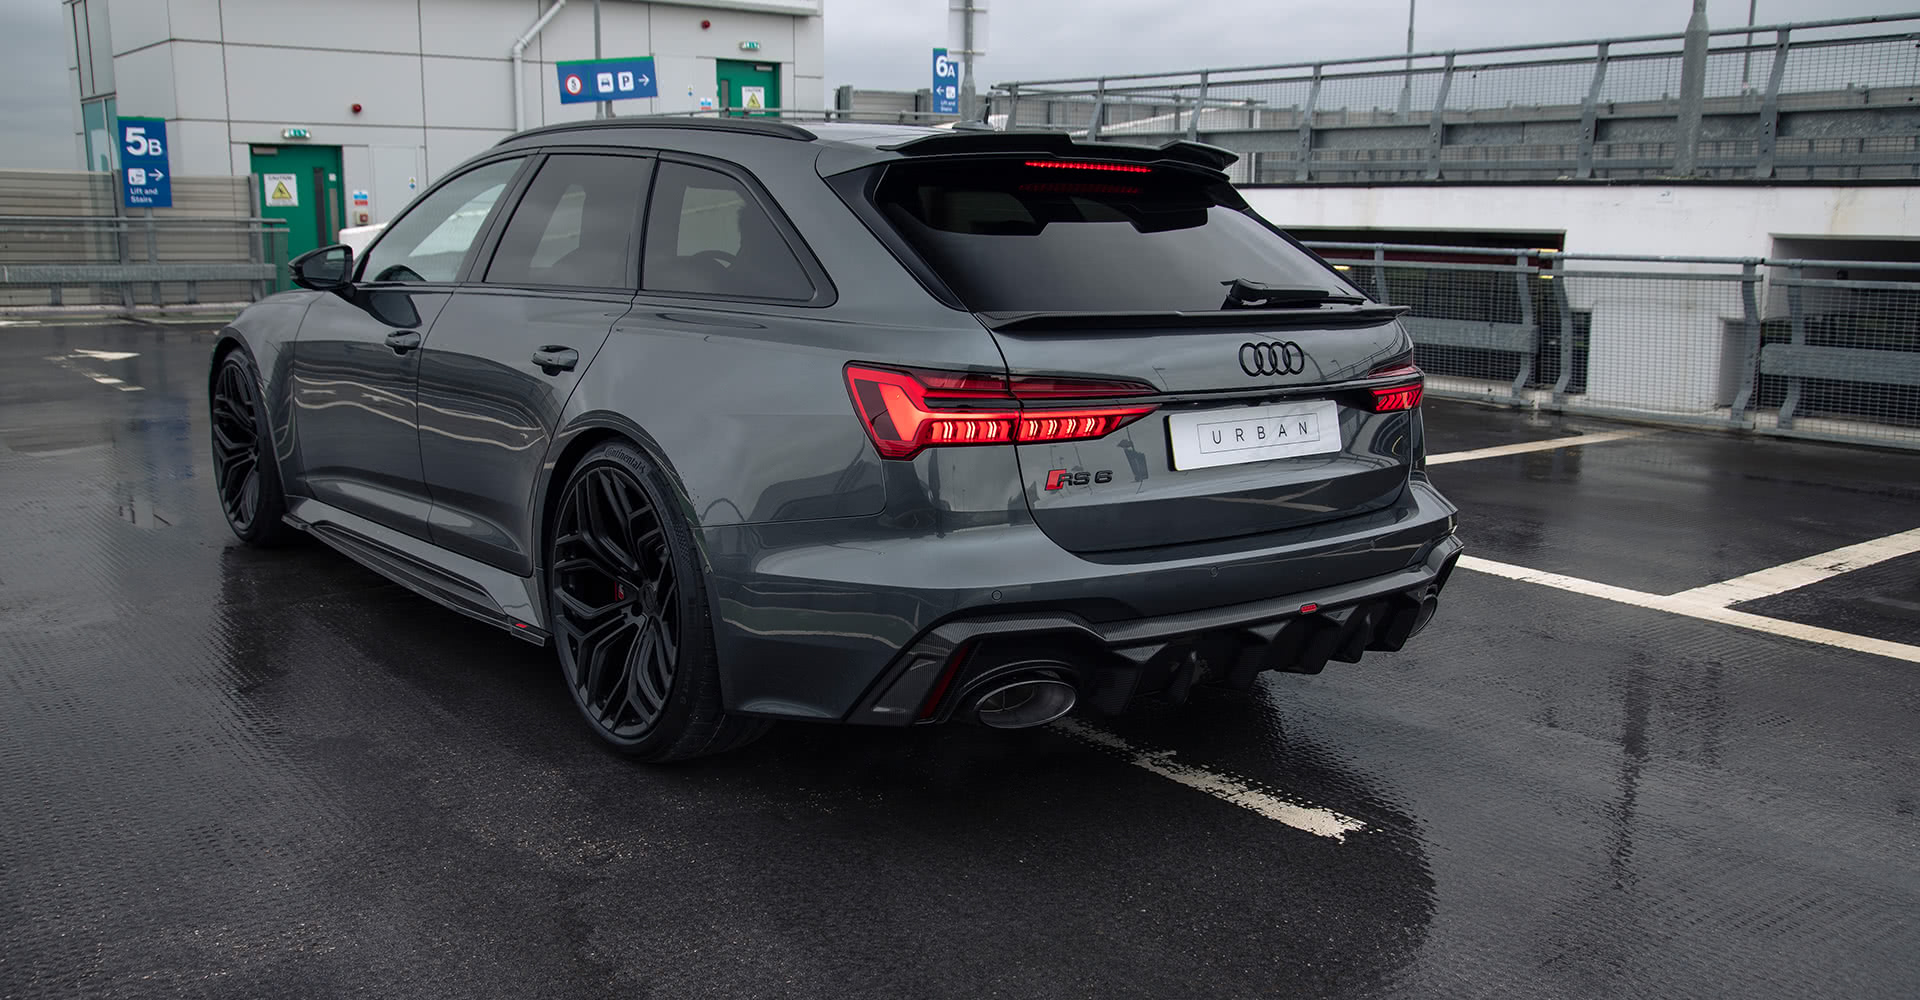 Check our price and buy Urban carbon fiber body kit set for Audi RS6 C8